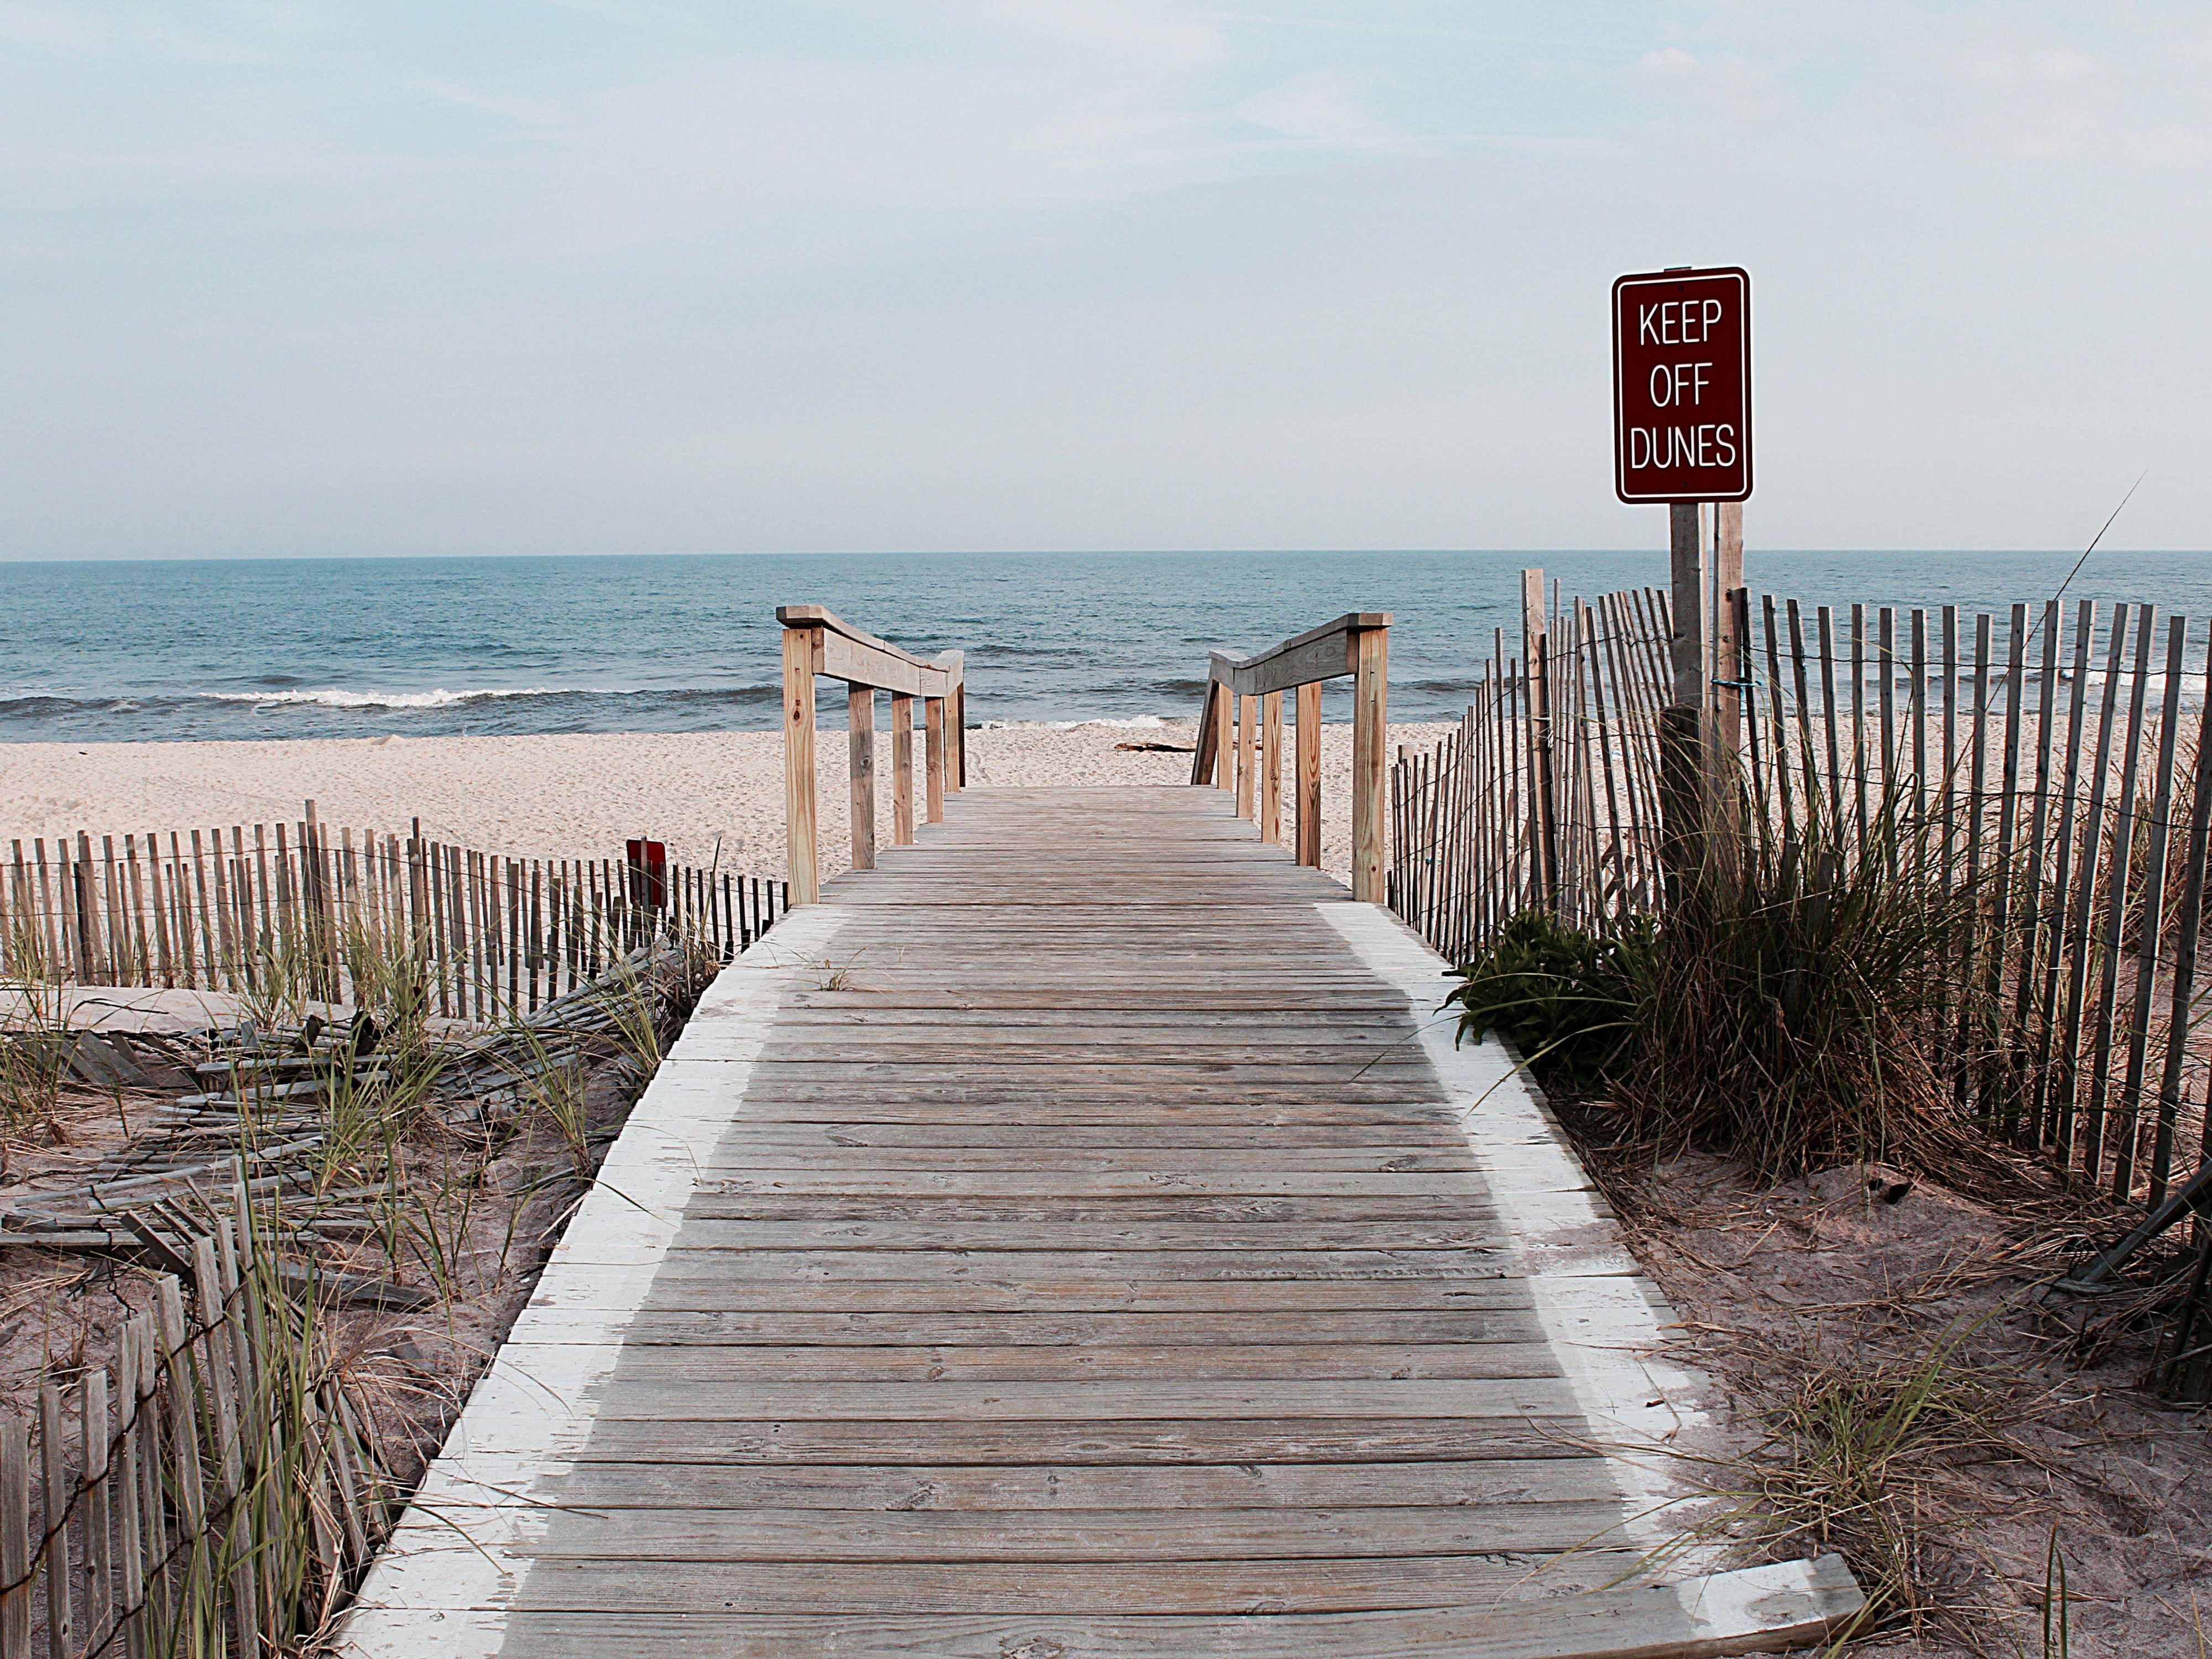 Visit Fire Island and spend the day soaking up some sun